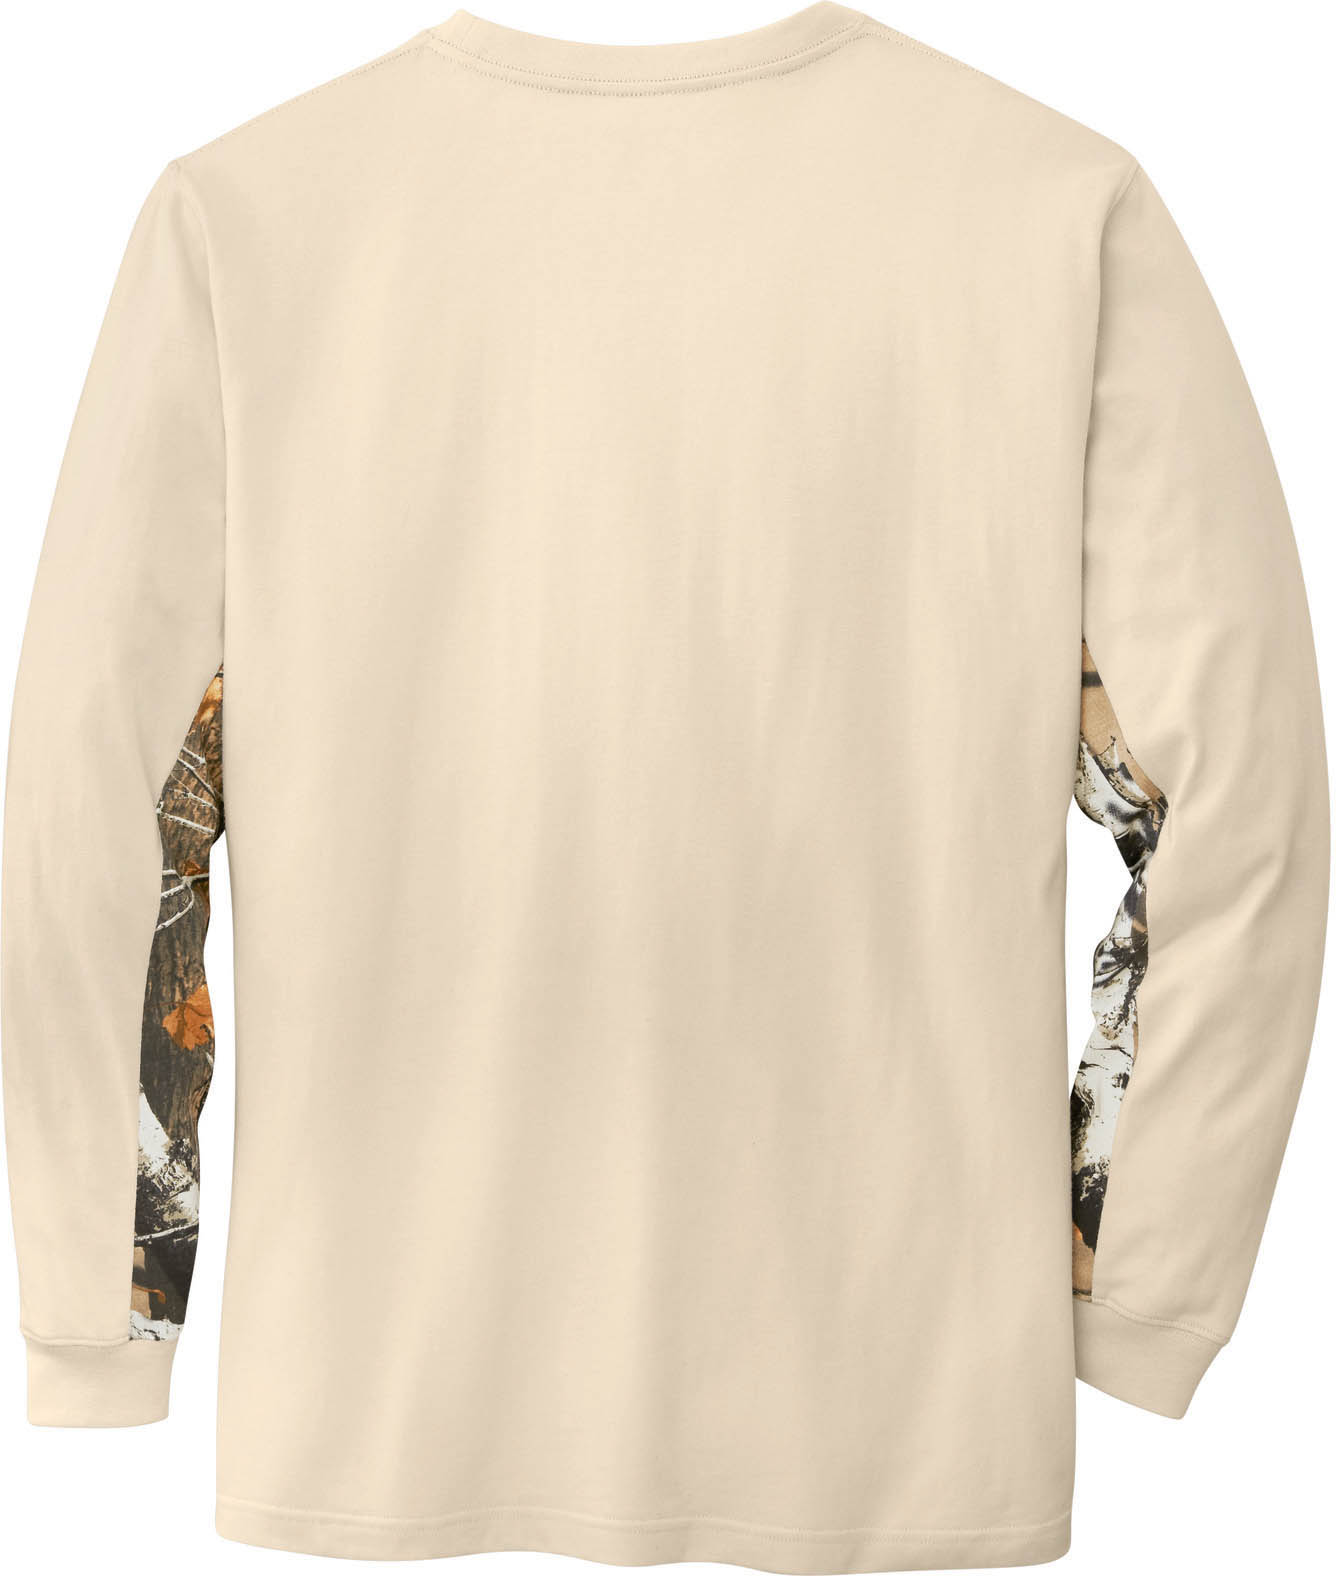 Shop Men's Backcountry Insect Repellent Long Sleeve Camo T-Shirt ... Tall Long Sleeve T Shirts Mens